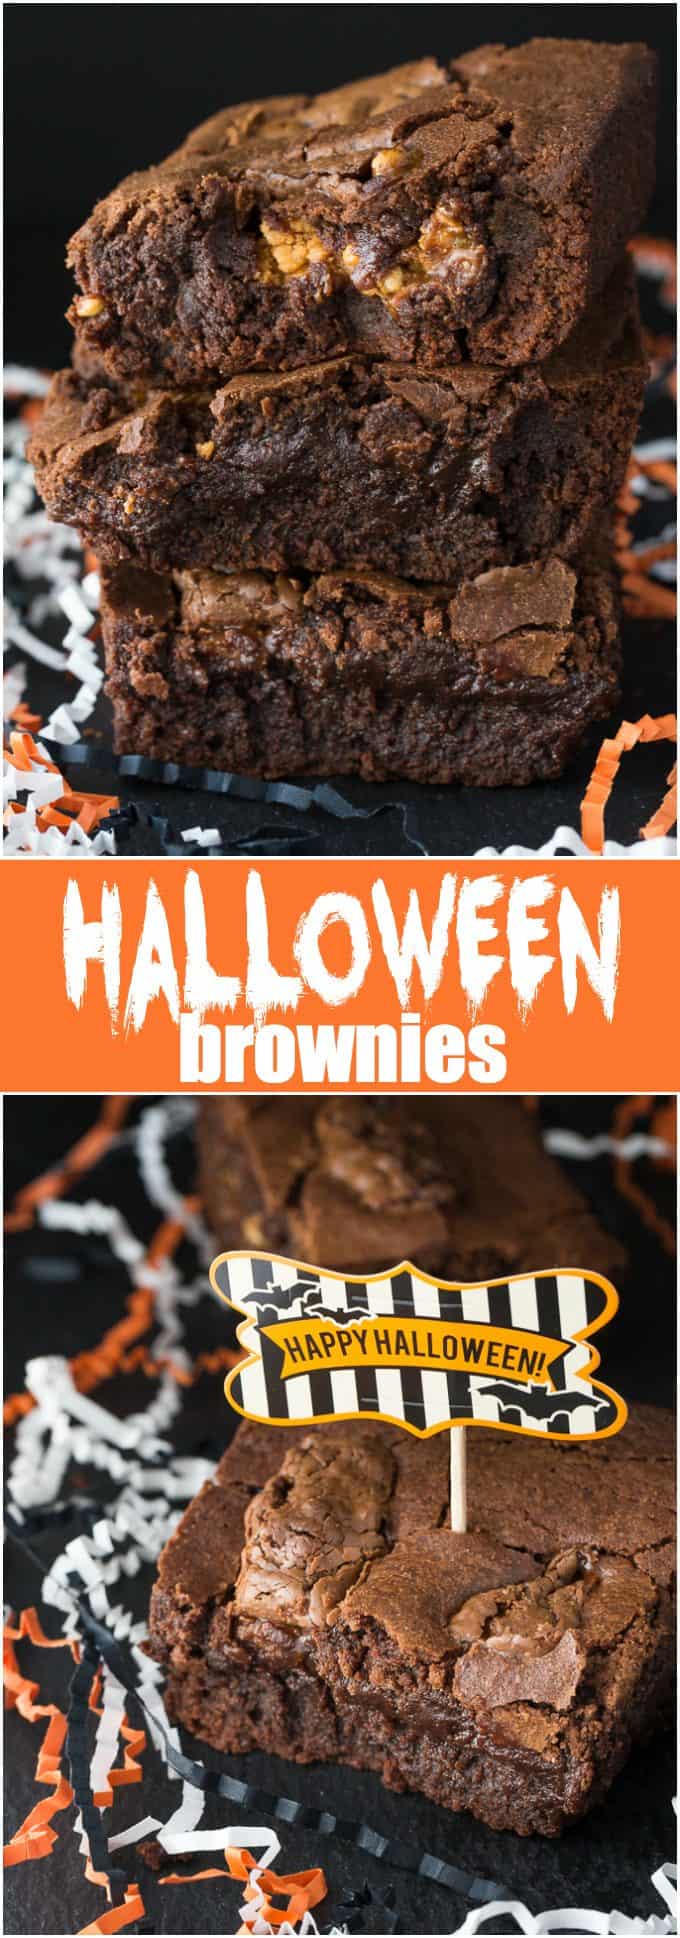 Halloween Brownies - Turn that Halloween candy into something more decadent! These brownies are just a hiding place for candy bars.